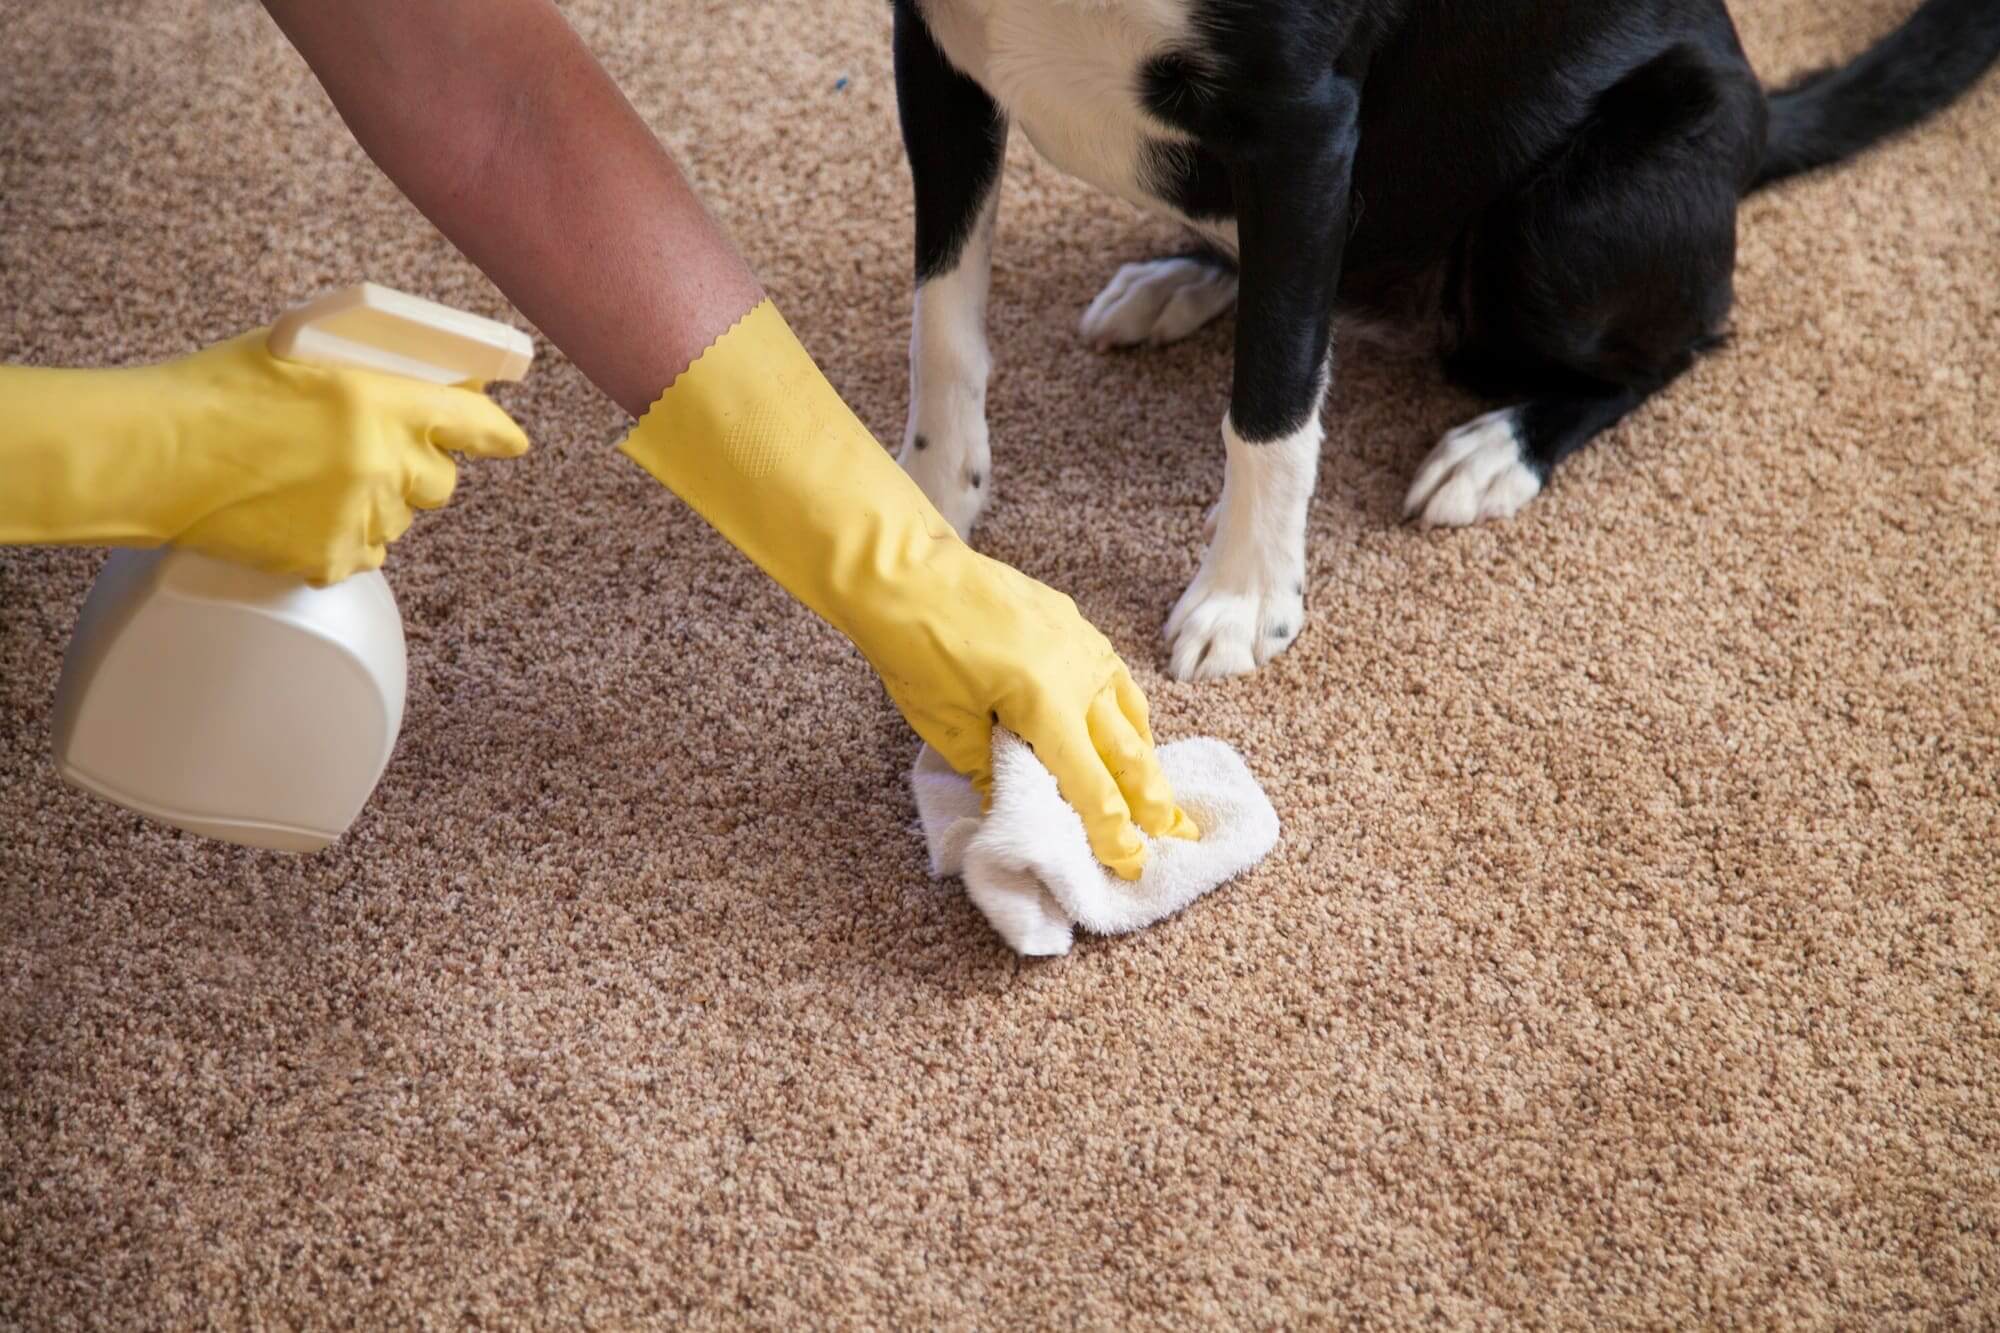 How to Maintain a Clean Home